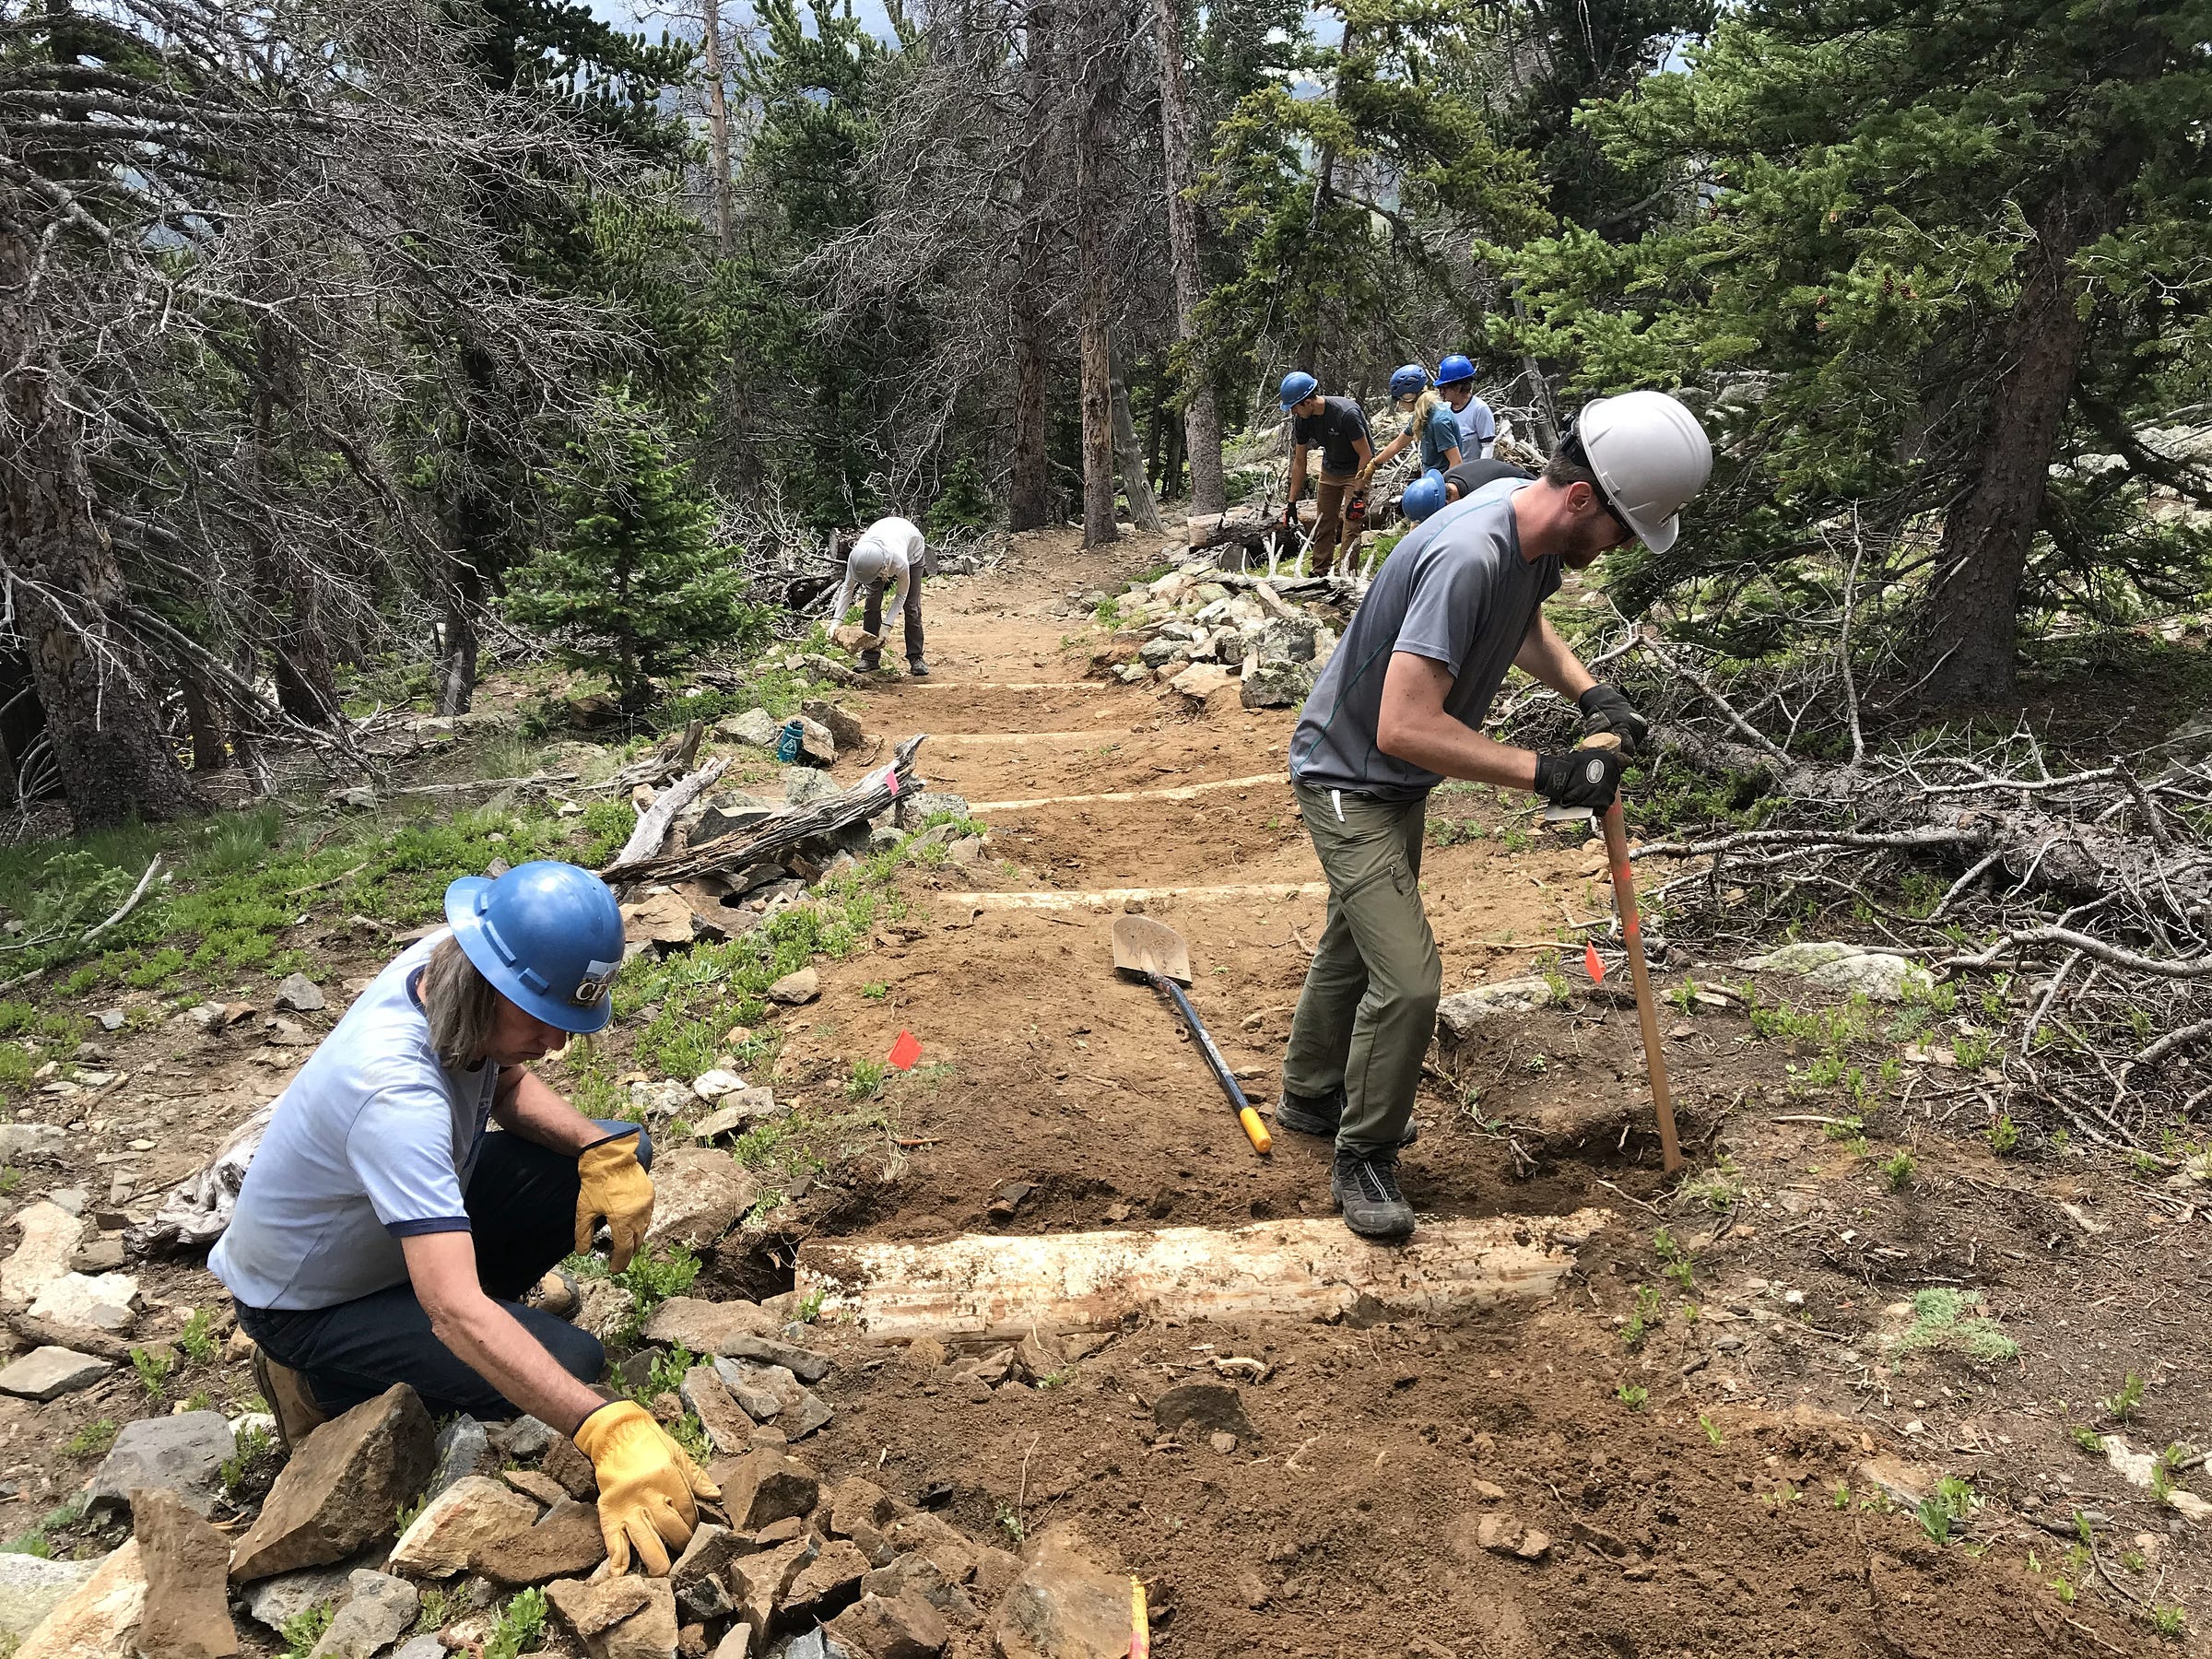 A crew works to install timber steps to grade a trail